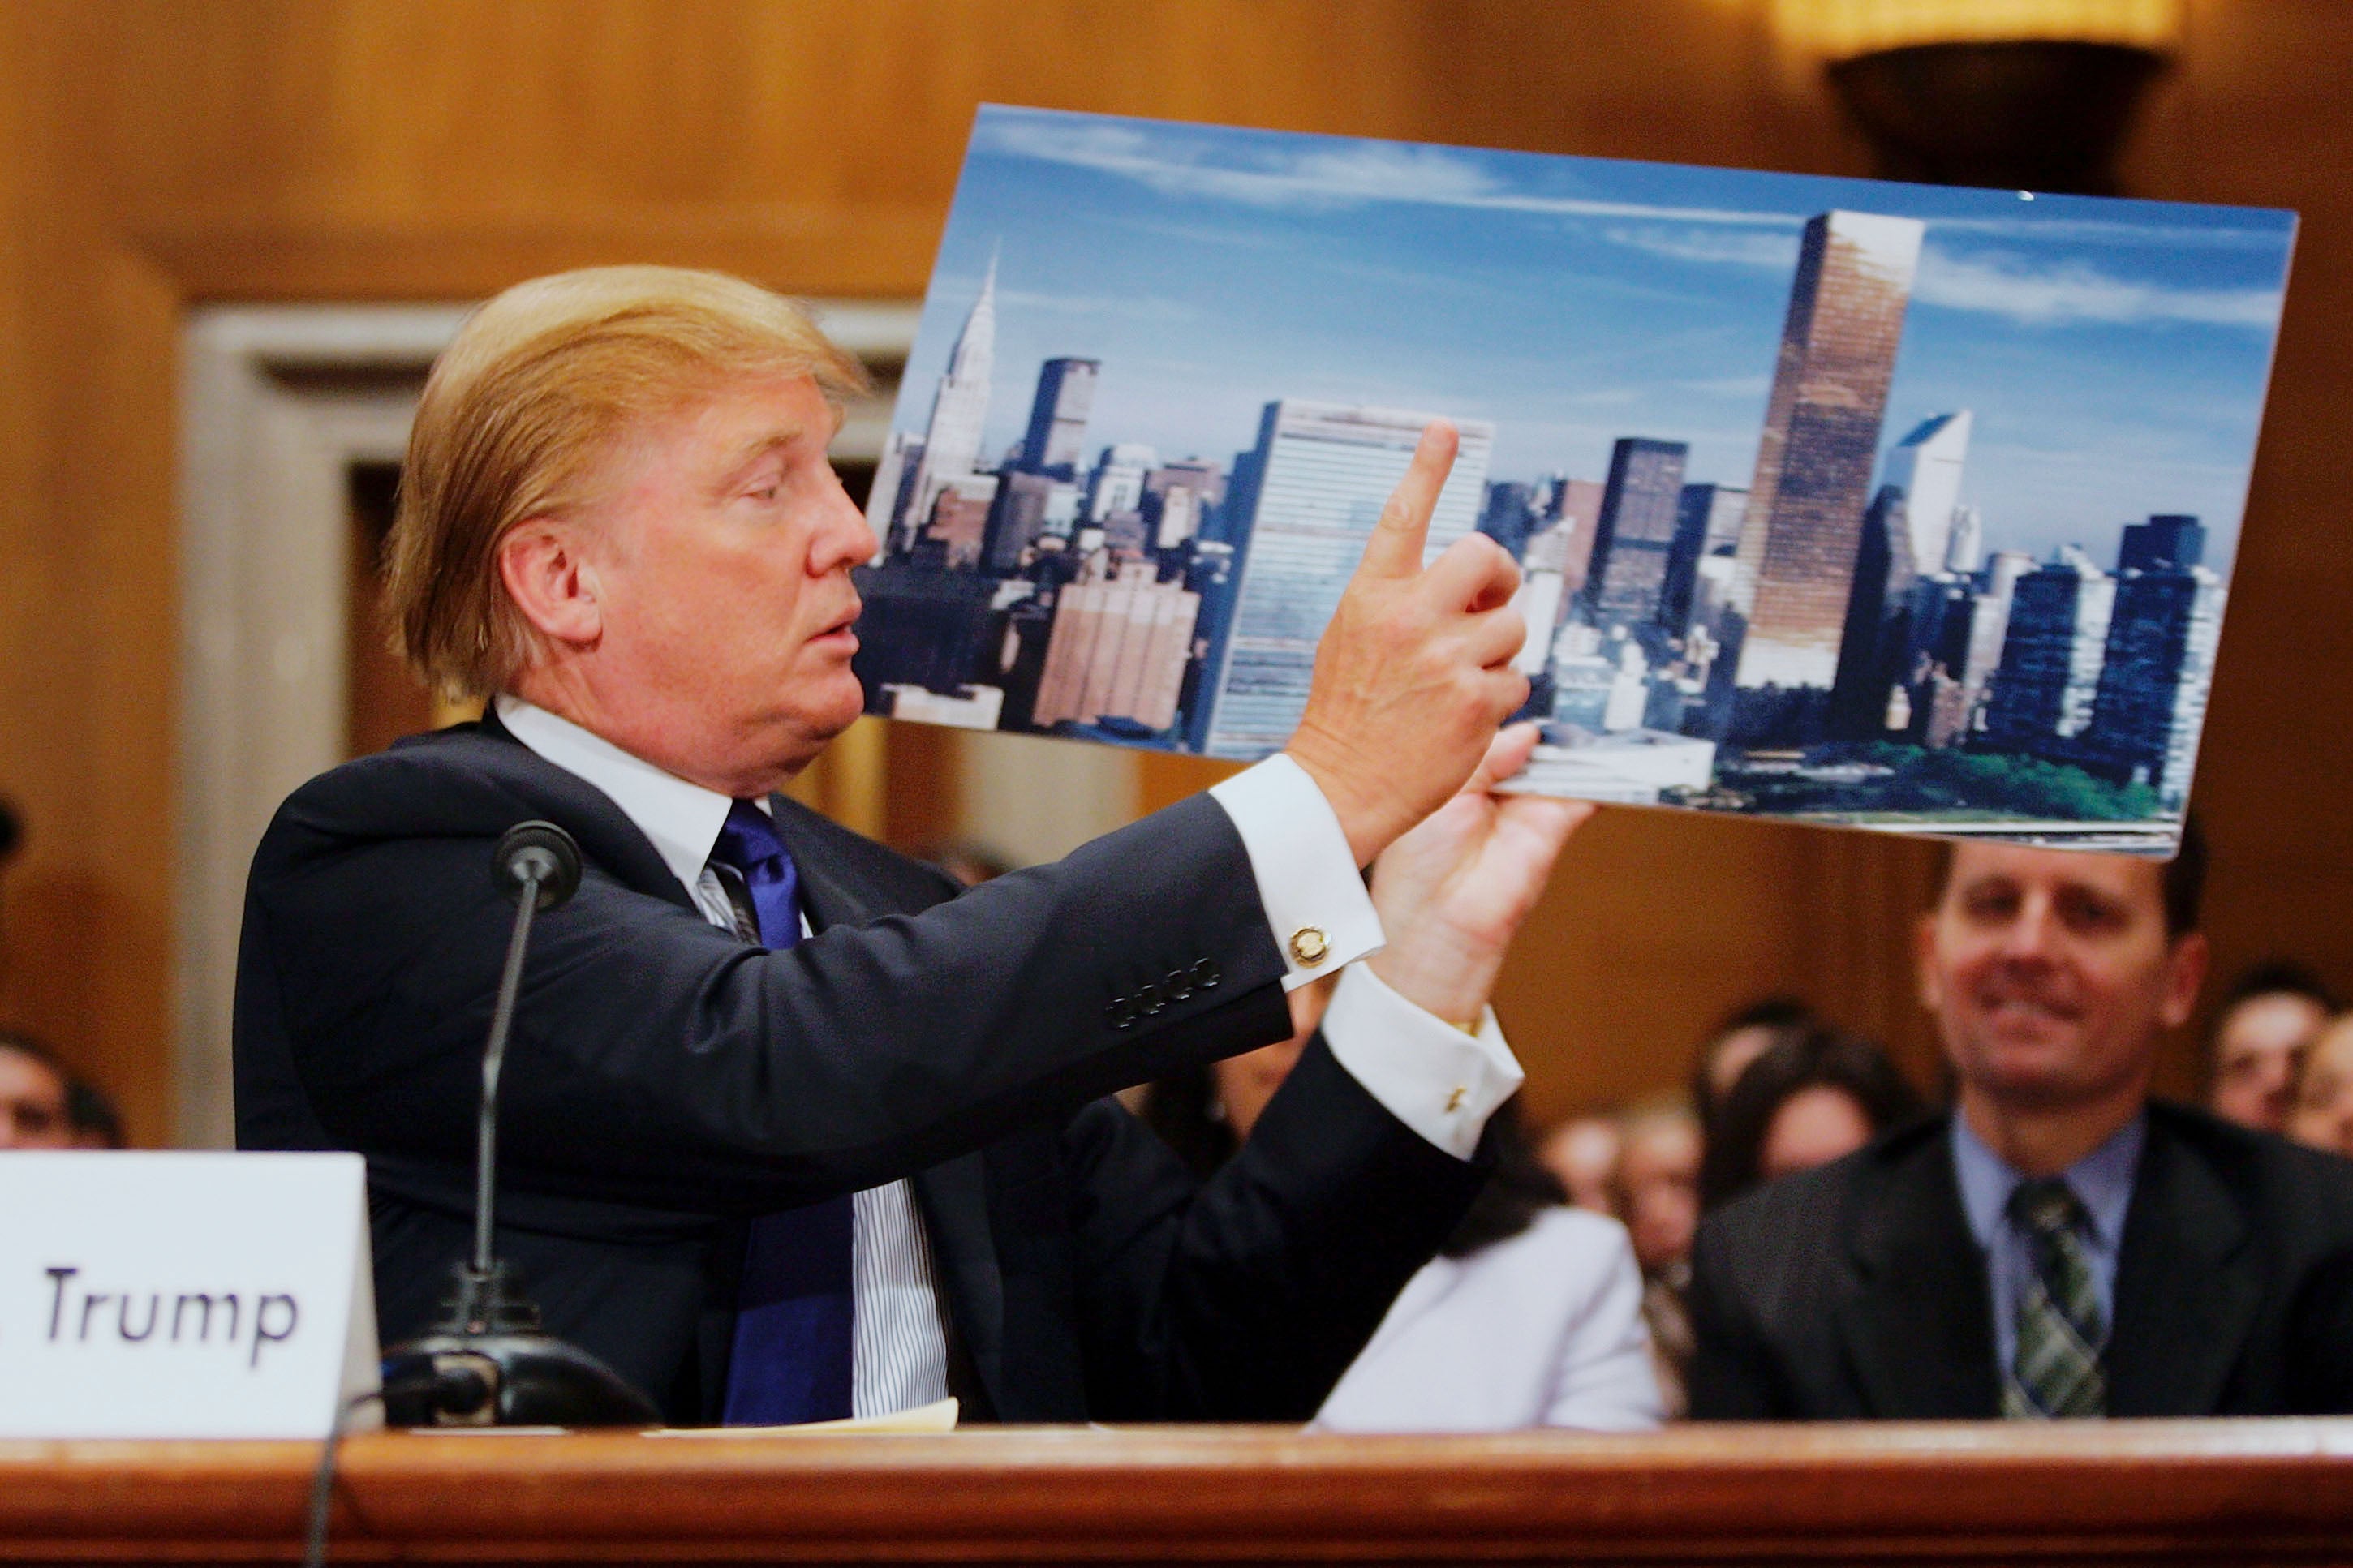 Donald Trump with a photo of the Trump World Tower, where the individual attesting to his alleged affair once worked, in Washington D.C. in 2005.